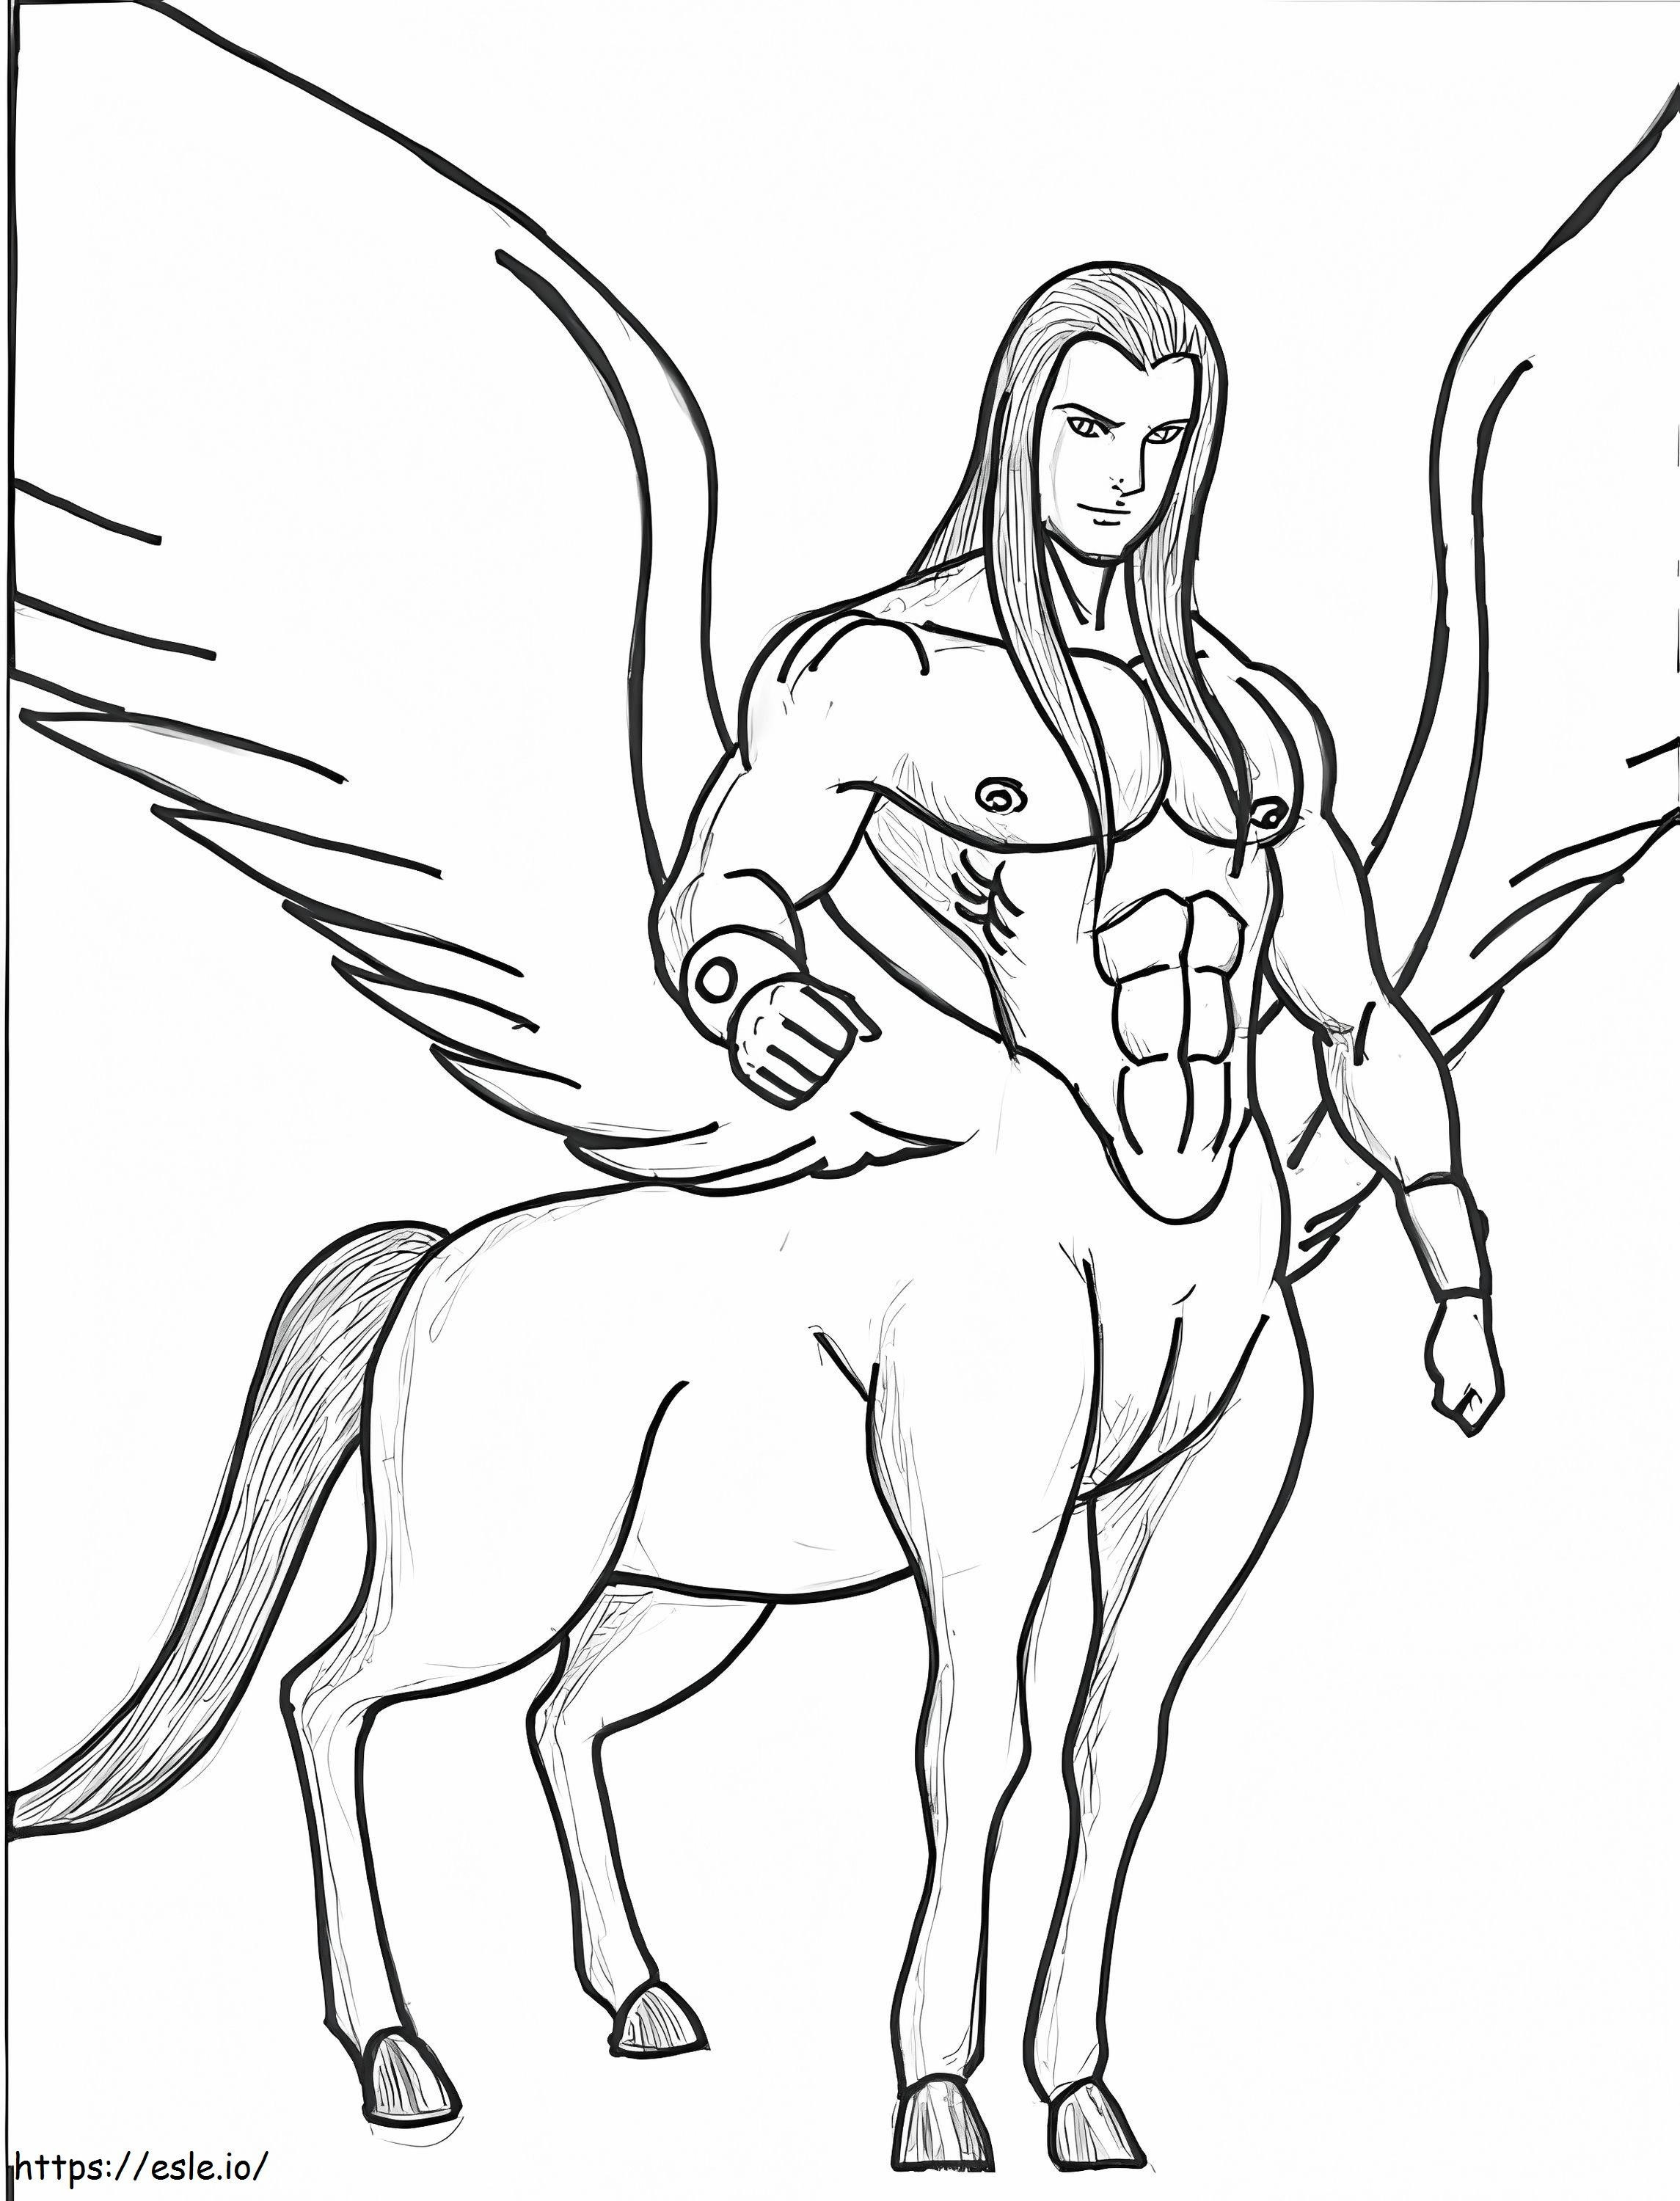 Awesome Centaur coloring page